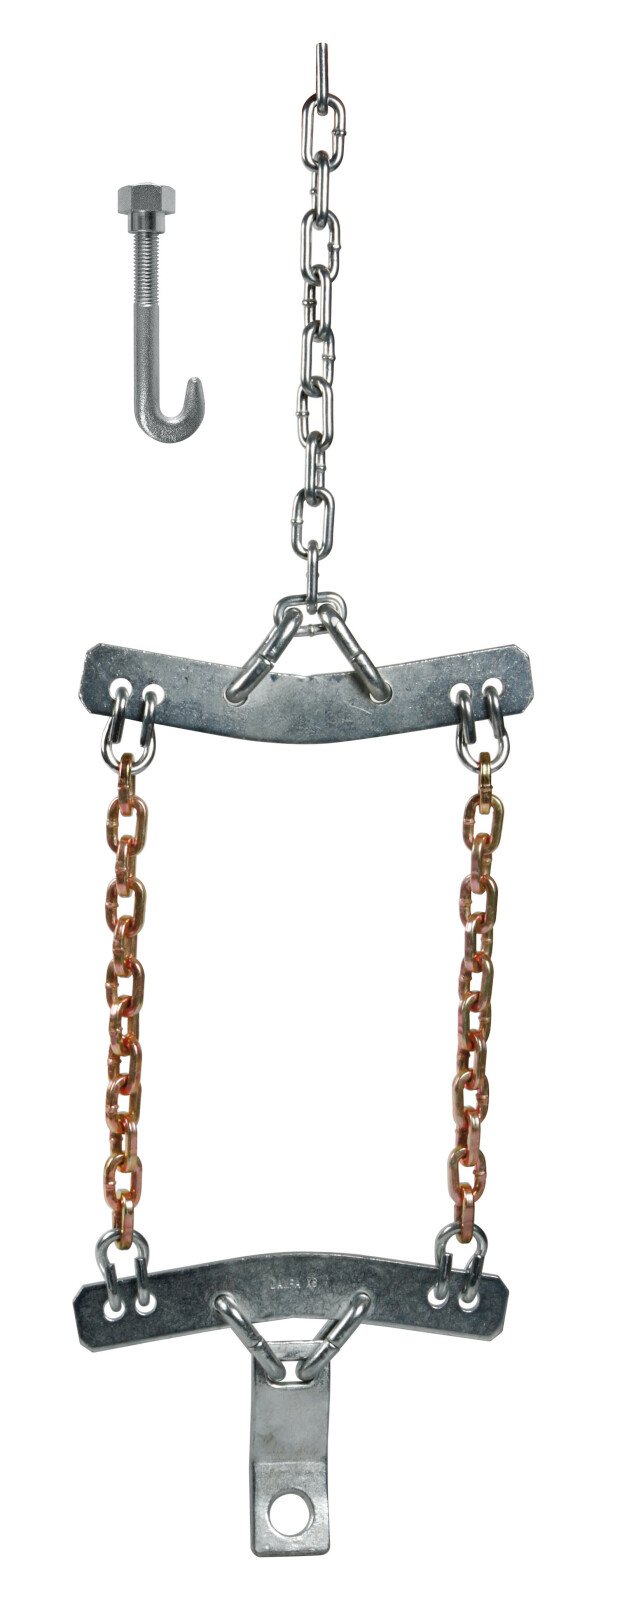 Track sector chains for trucks - XS-2 thumb